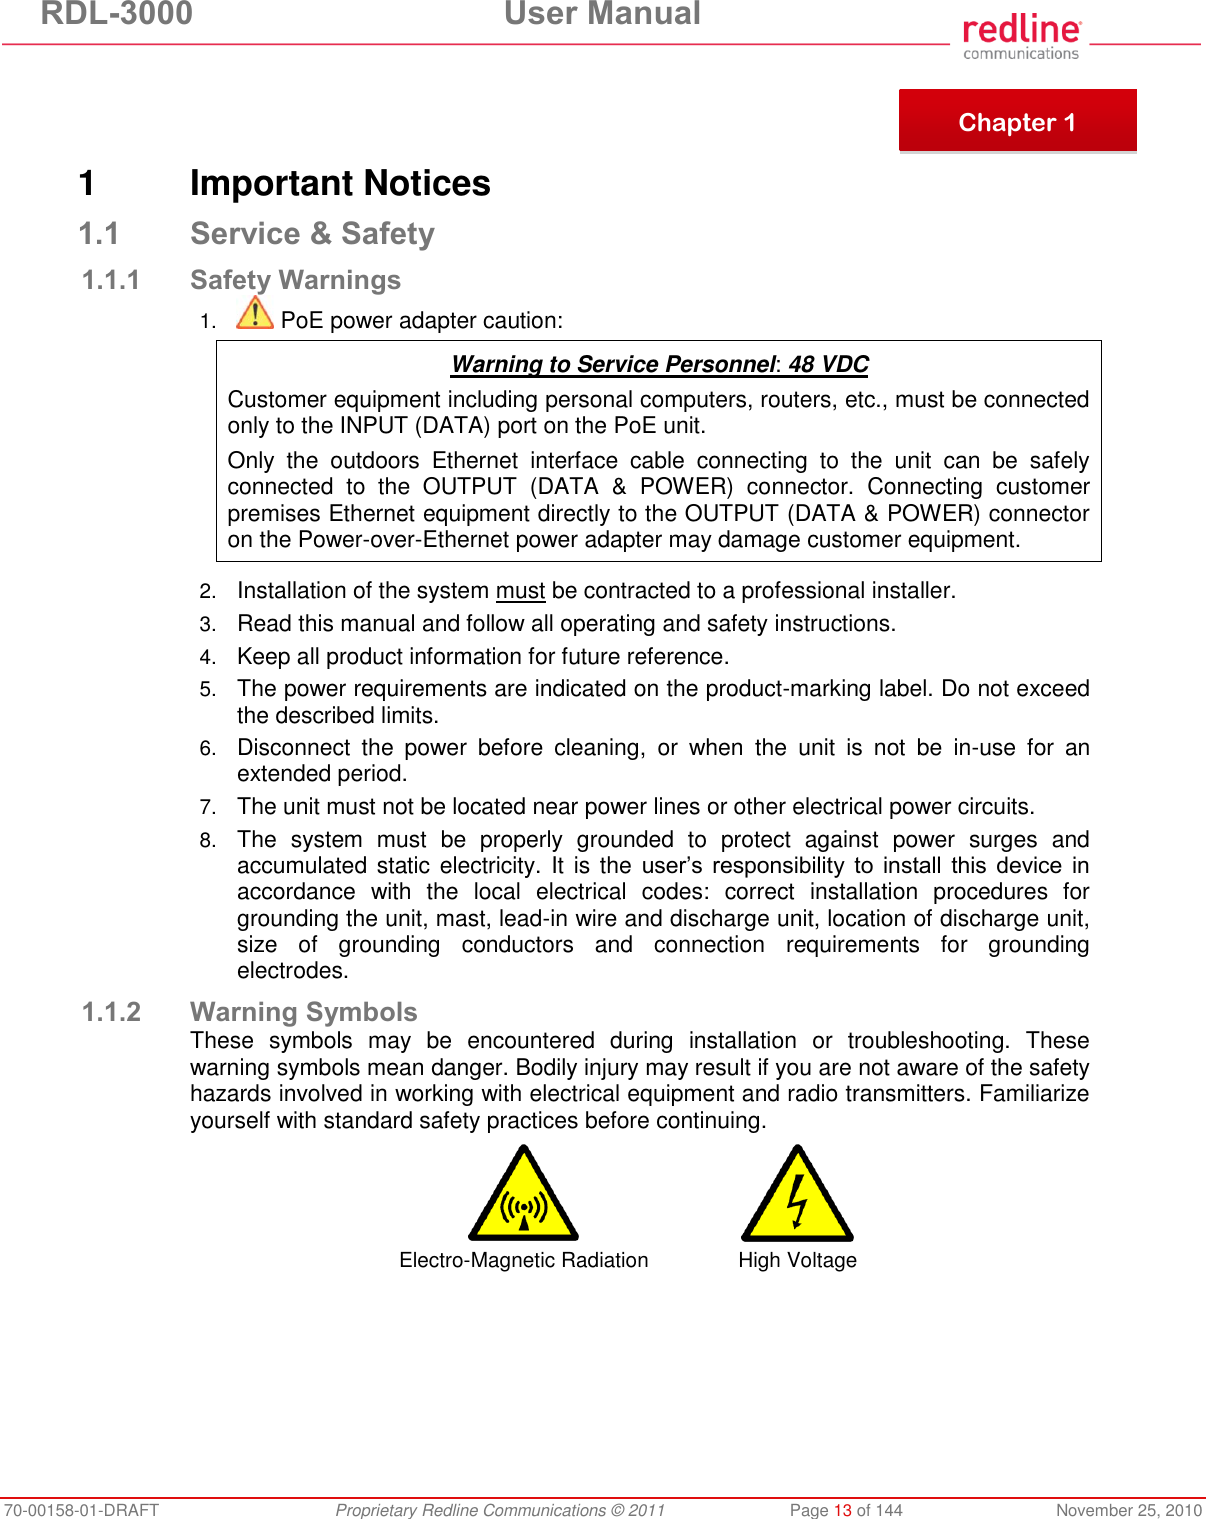 RDL-3000  User Manual 70-00158-01-DRAFT  Proprietary Redline Communications © 2011  Page 13 of 144  November 25, 2010      1  Important Notices 1.1 Service &amp; Safety 1.1.1 Safety Warnings 1.  PoE power adapter caution:  Warning to Service Personnel: 48 VDC Customer equipment including personal computers, routers, etc., must be connected only to the INPUT (DATA) port on the PoE unit.  Only  the  outdoors  Ethernet  interface  cable  connecting  to  the  unit  can  be  safely connected  to  the  OUTPUT  (DATA  &amp;  POWER)  connector.  Connecting  customer premises Ethernet equipment directly to the OUTPUT (DATA &amp; POWER) connector on the Power-over-Ethernet power adapter may damage customer equipment.  2. Installation of the system must be contracted to a professional installer. 3. Read this manual and follow all operating and safety instructions. 4. Keep all product information for future reference. 5. The power requirements are indicated on the product-marking label. Do not exceed the described limits. 6. Disconnect  the  power  before  cleaning,  or  when  the  unit  is  not  be  in-use  for  an extended period. 7. The unit must not be located near power lines or other electrical power circuits. 8. The  system  must  be  properly  grounded  to  protect  against  power  surges  and accumulated static electricity. It is the  user’s responsibility  to  install  this device in accordance  with  the  local  electrical  codes:  correct  installation  procedures  for grounding the unit, mast, lead-in wire and discharge unit, location of discharge unit, size  of  grounding  conductors  and  connection  requirements  for  grounding electrodes. 1.1.2 Warning Symbols These  symbols  may  be  encountered  during  installation  or  troubleshooting.  These warning symbols mean danger. Bodily injury may result if you are not aware of the safety hazards involved in working with electrical equipment and radio transmitters. Familiarize yourself with standard safety practices before continuing.   Electro-Magnetic Radiation High Voltage   Chapter 1 